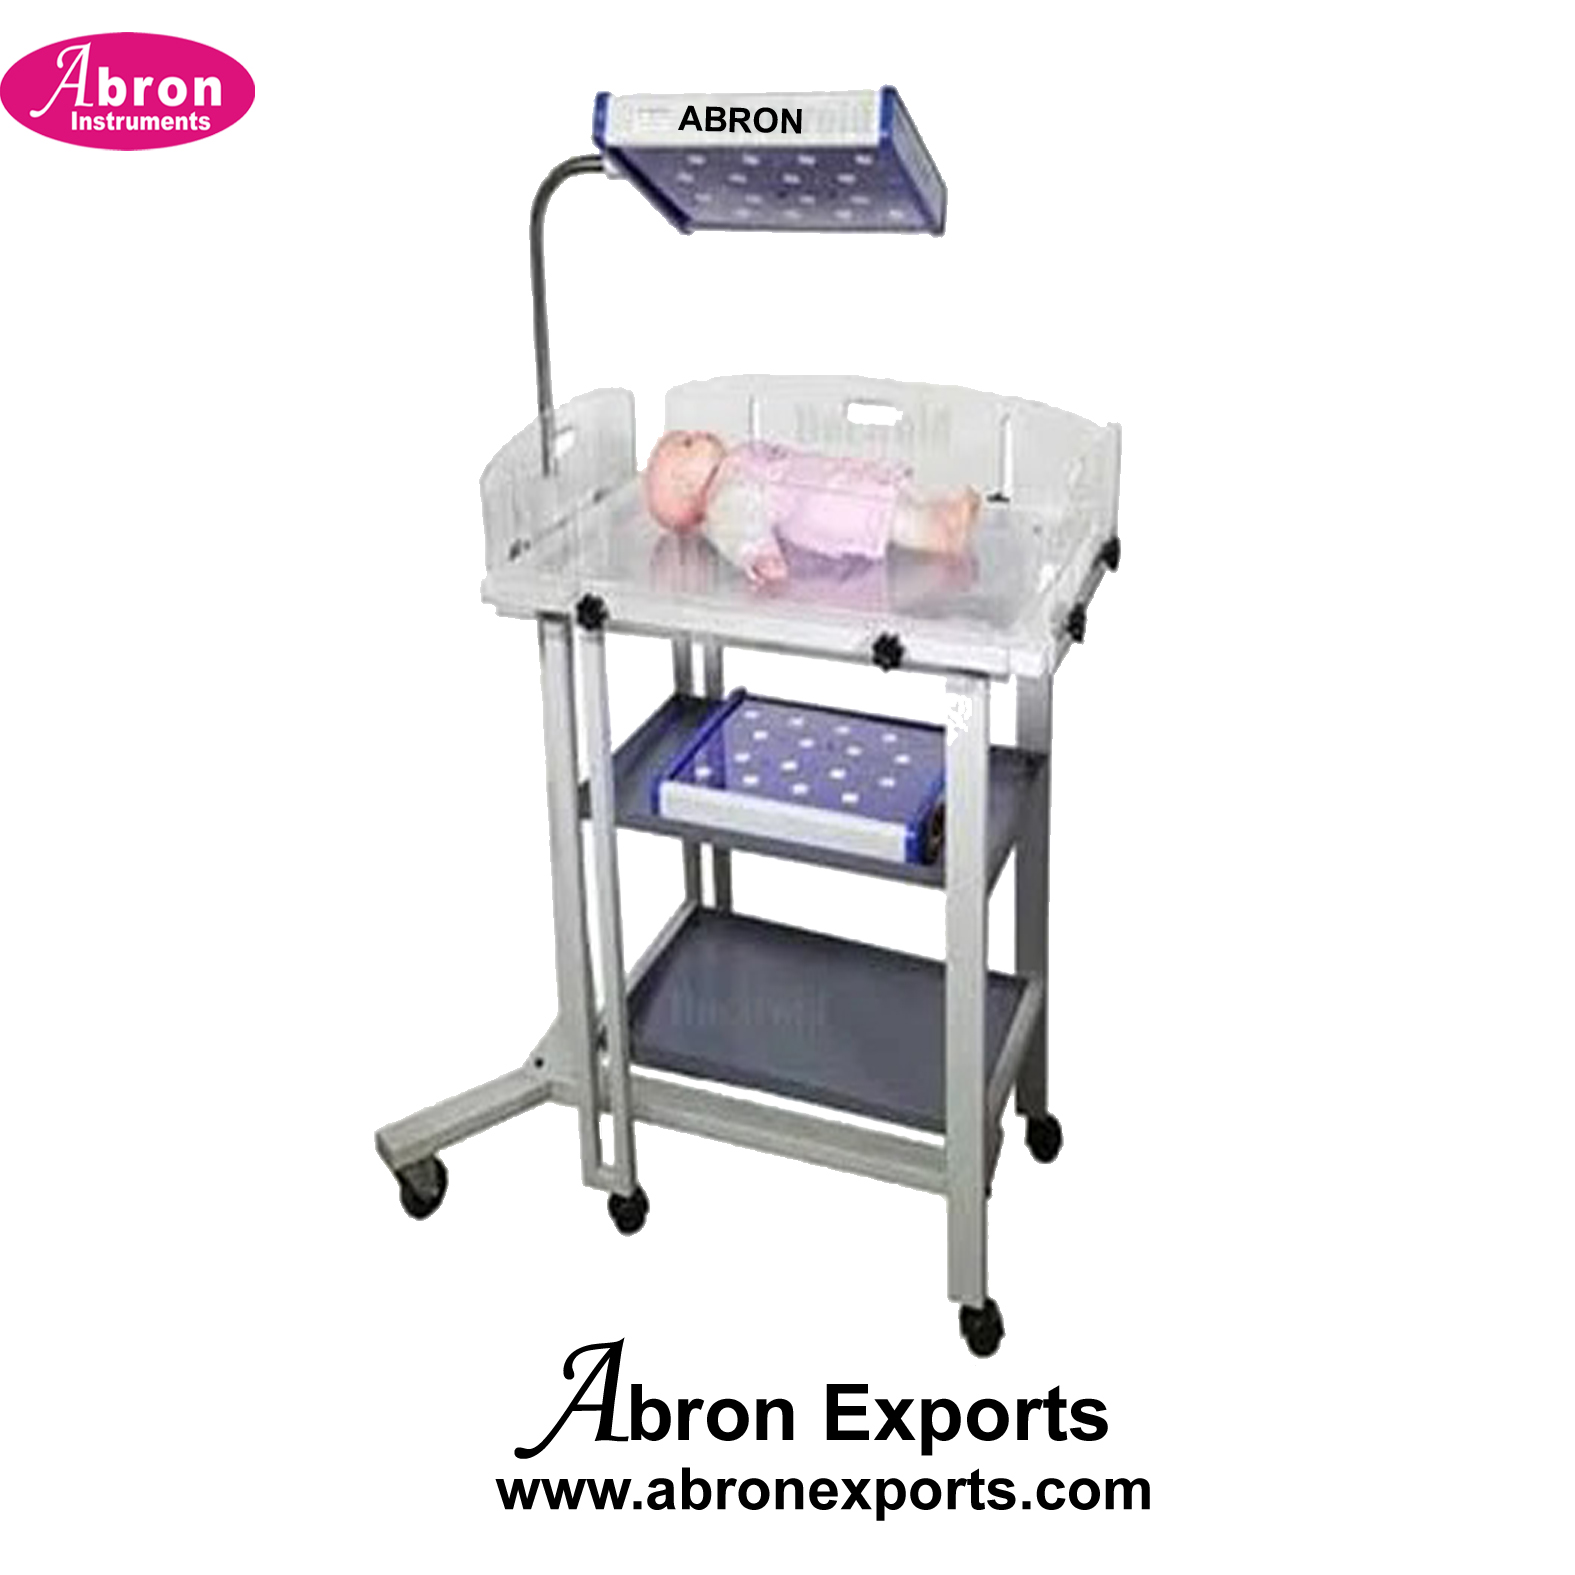 Phototherapy Units Single Dome Wih Trolley LED Fire Retendent Encloser Neonatal Baby Hospital Nursing Home Abron ABM-2376B